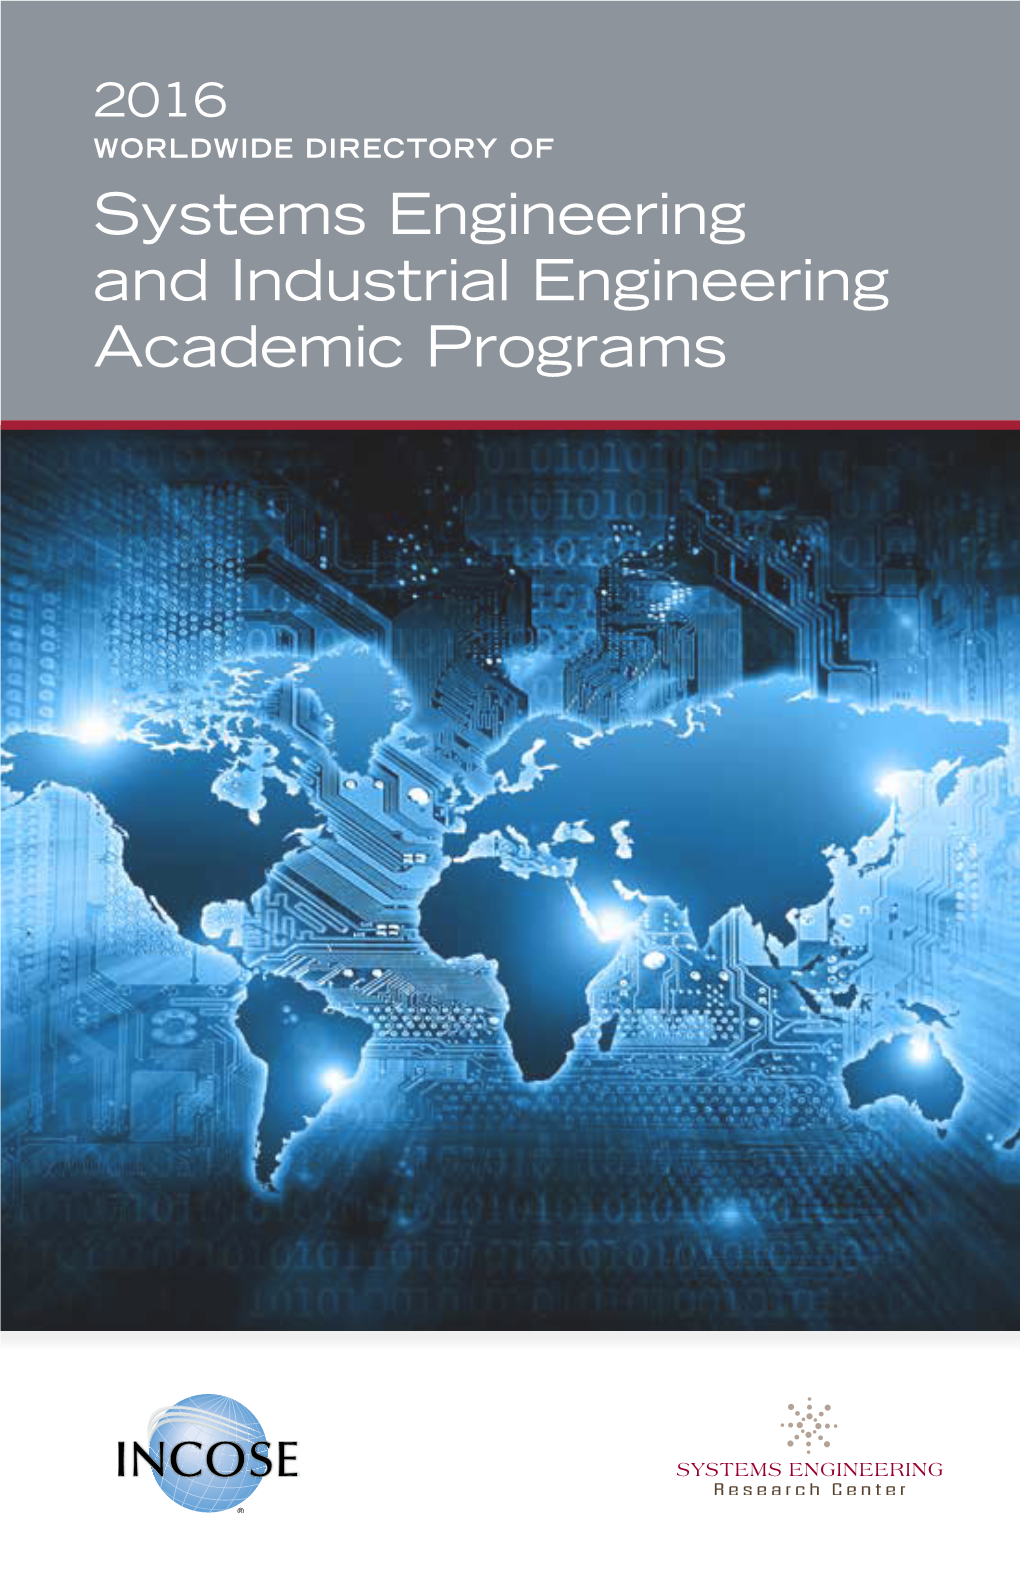 Systems Engineering and Industrial Engineering Academic Programs